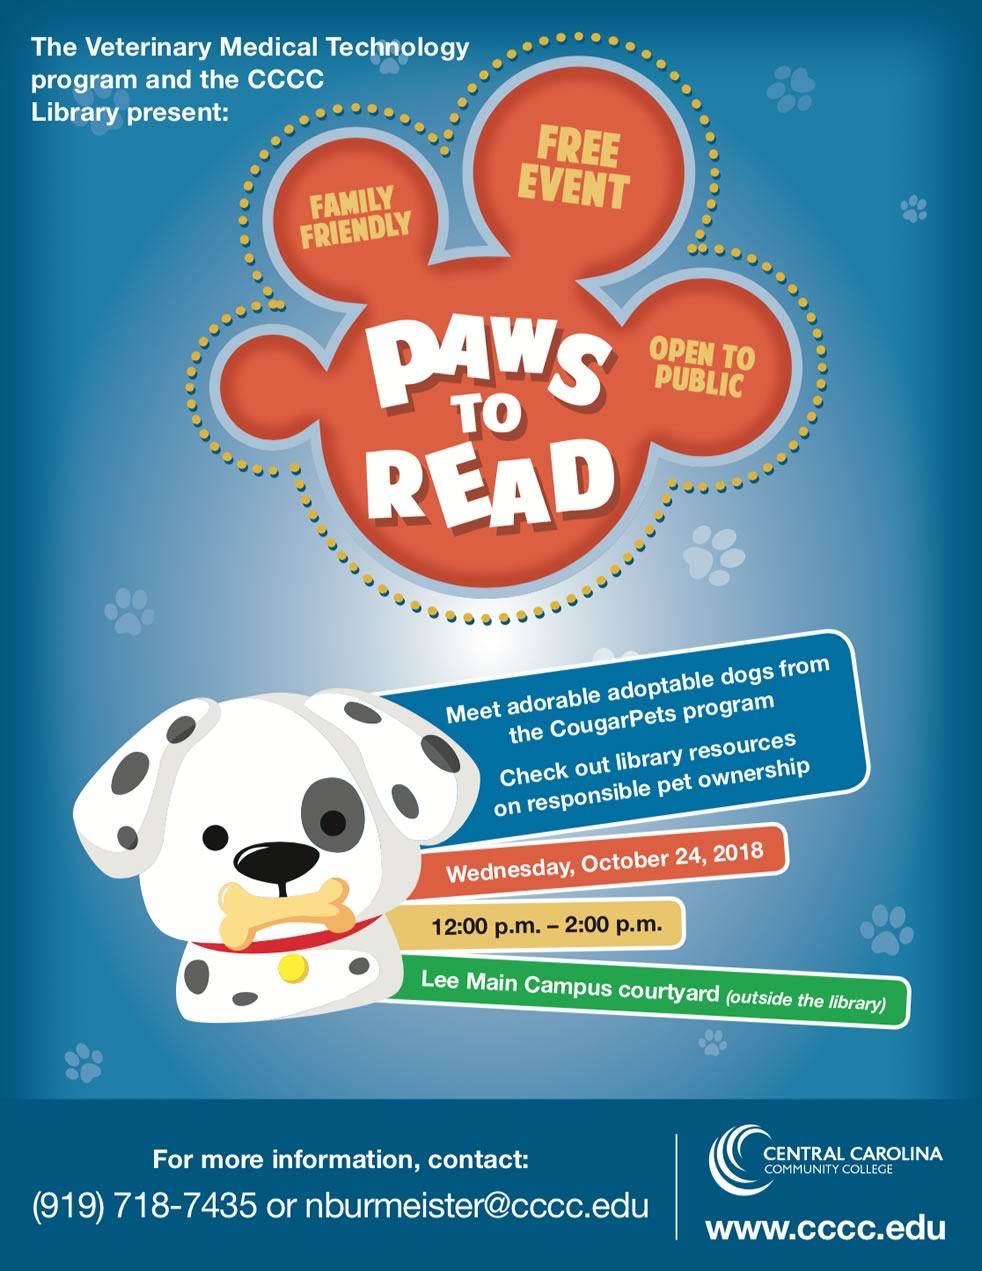 Paws to read